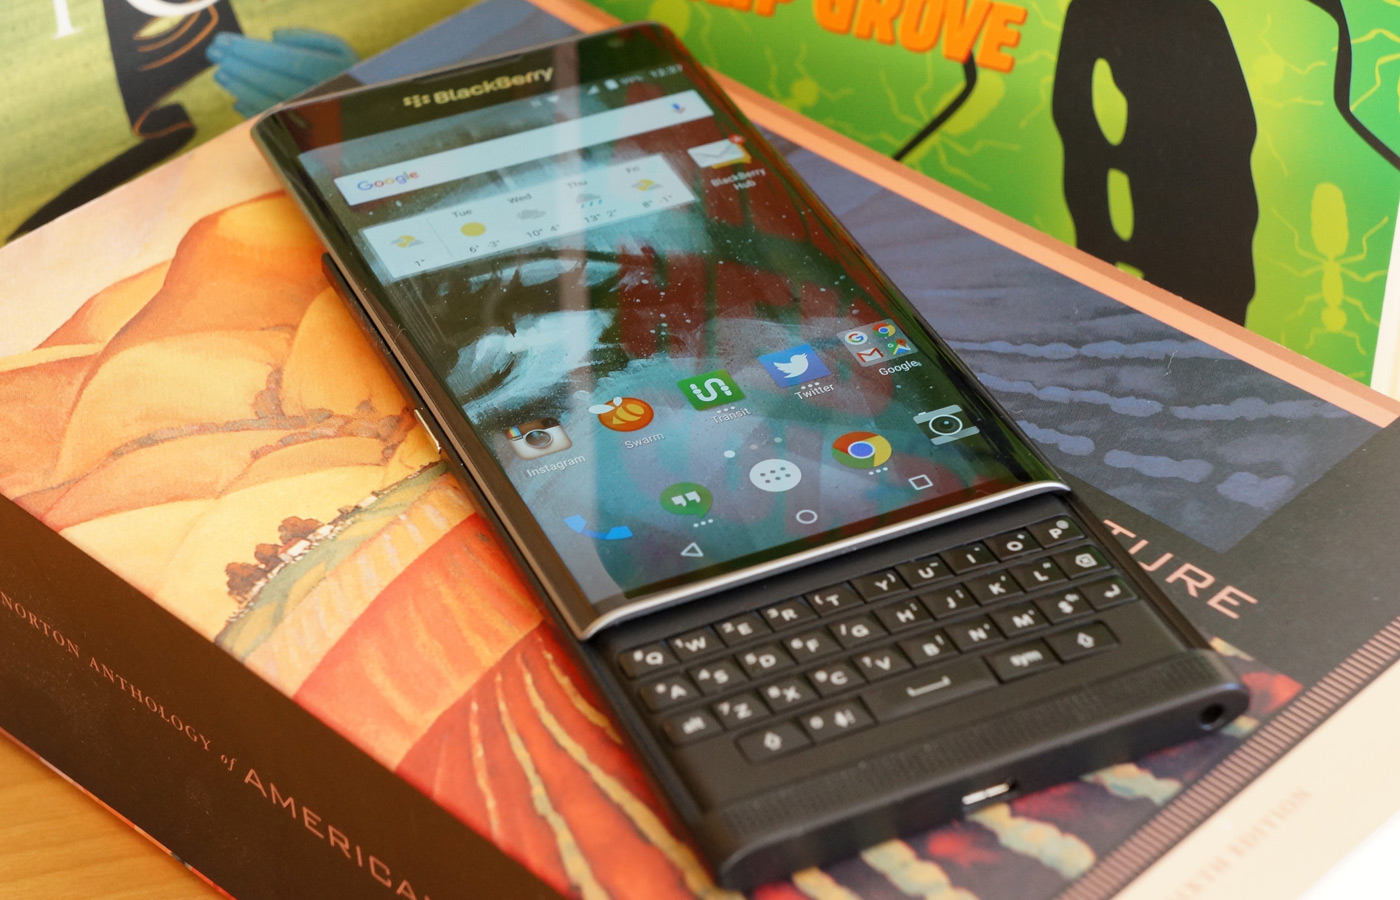 Living with the BlackBerry Priv hooked me on its keyboard